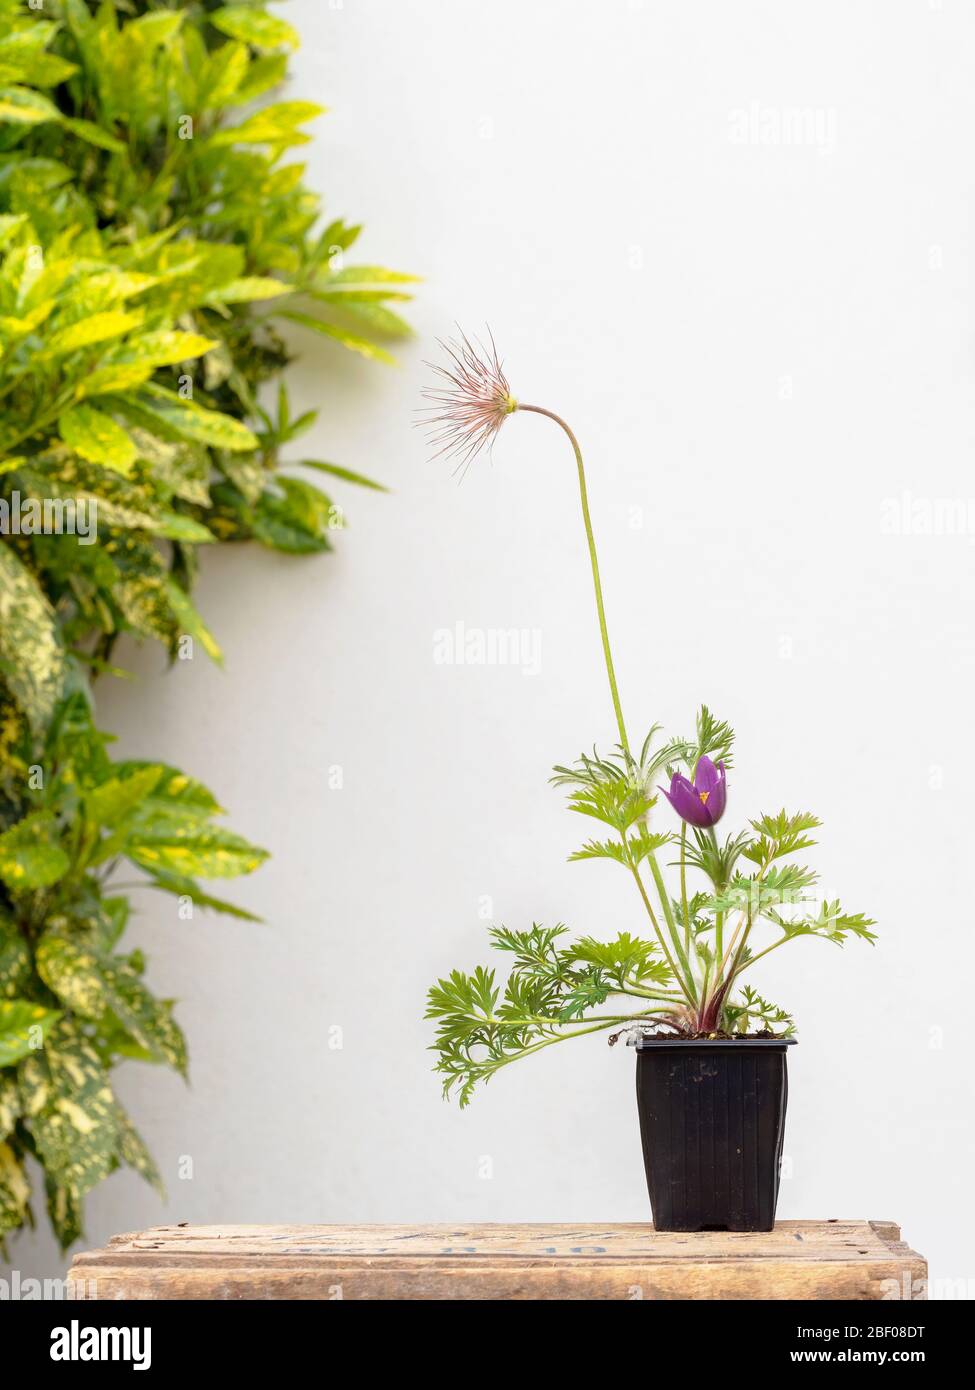 Pulsatilla vulgaris, aka Pasqueflower, garden plant, in small tub, garden setting with Variegated laurel and white wall behind. Stock Photo